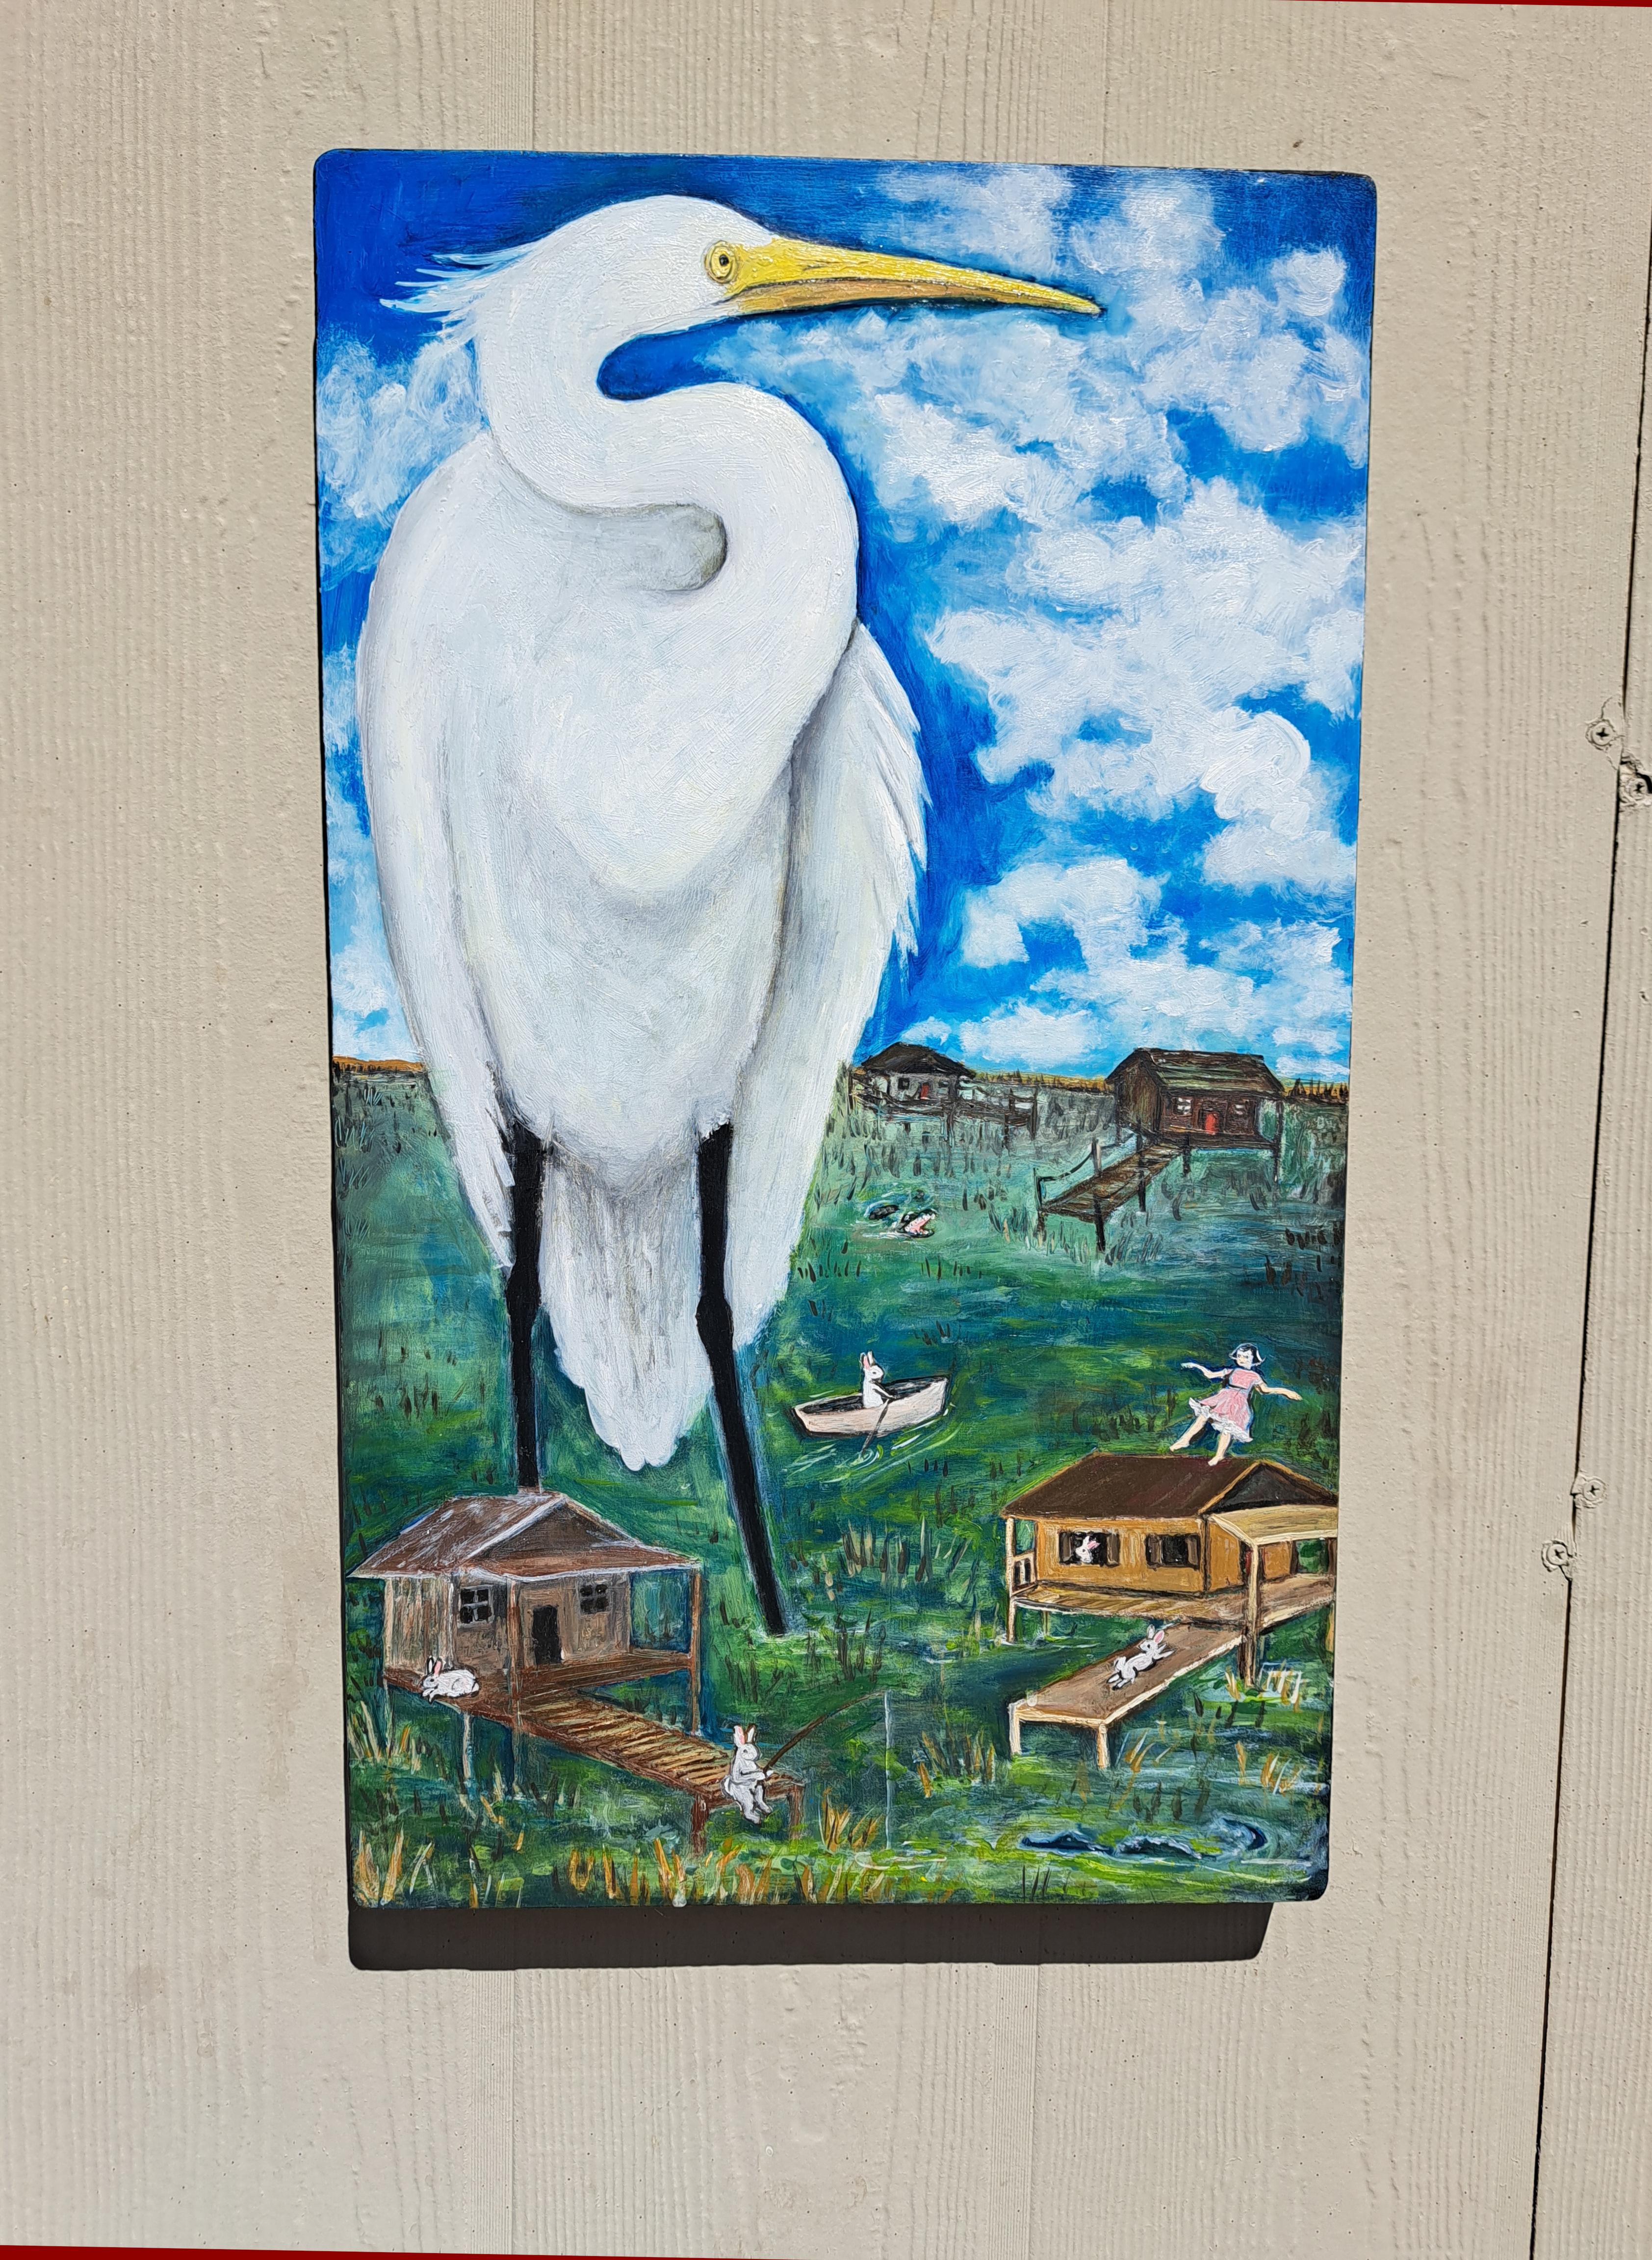 <p>Artist Comments<br />The artwork reflects on the abundance of wildlife in Florida and the constant struggle humans face in controlling nature. Dominating the scene, a giant egret hovers over houses while alligators lurk in the water, signifying